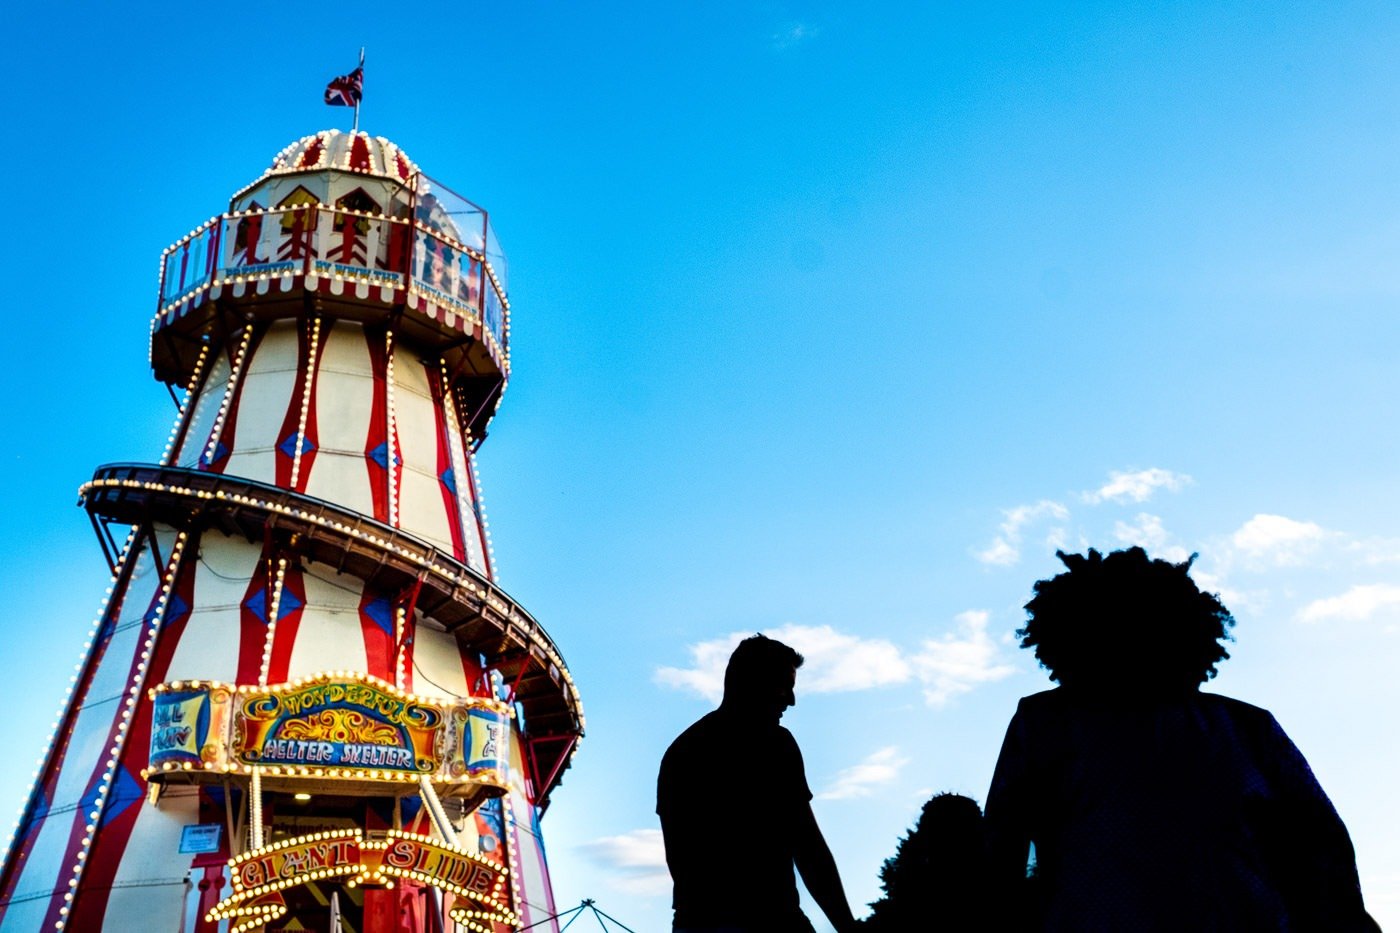 People silhouetted in front of a helter skelter at Camp Bestival